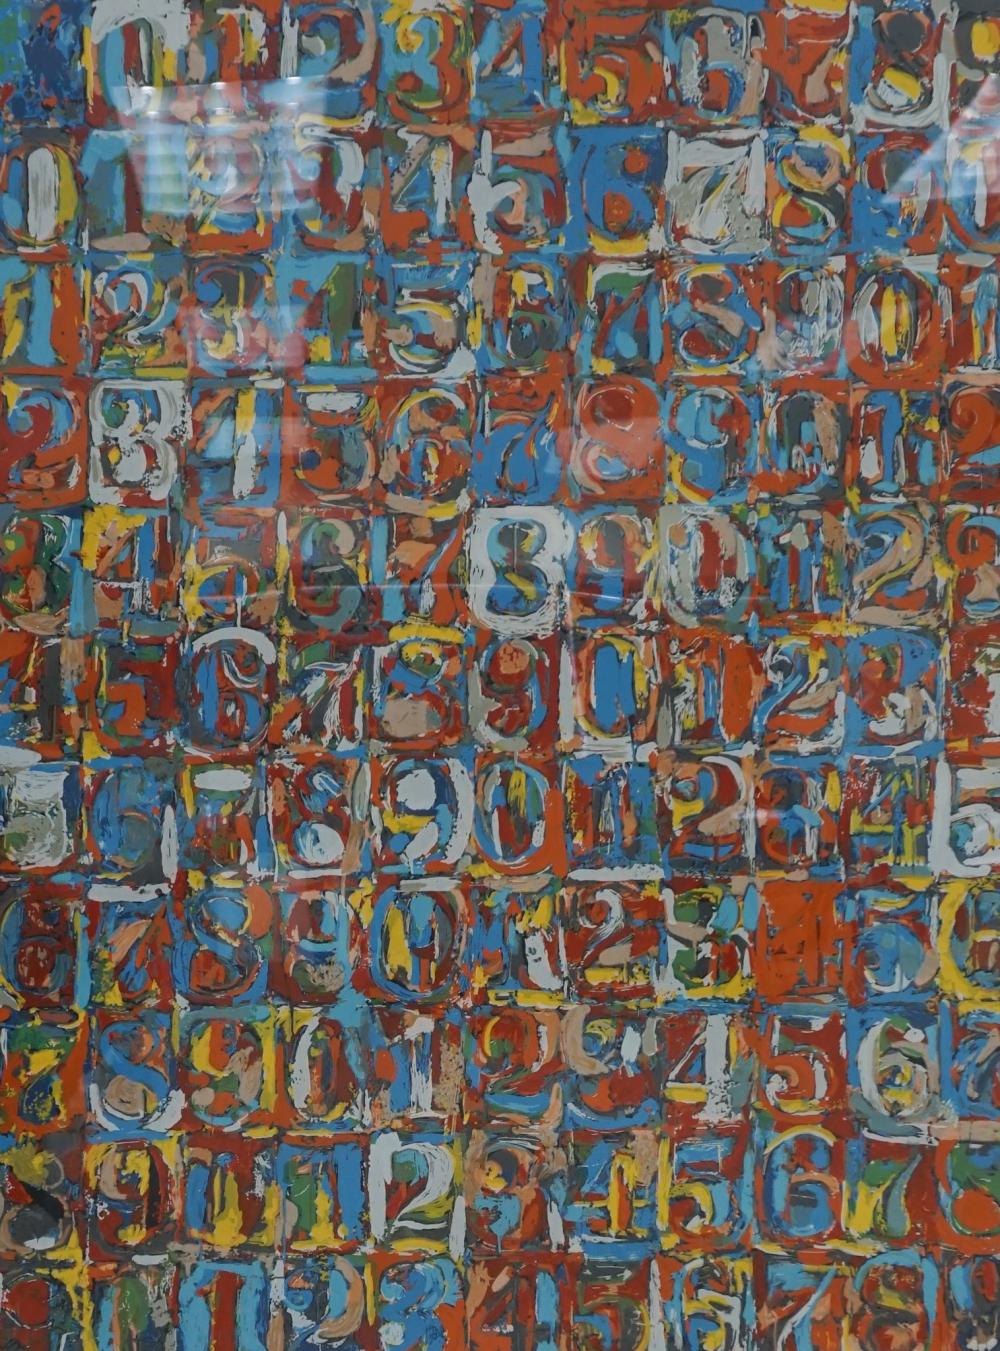 AFTER JASPER JOHNS, NUMBERS IN